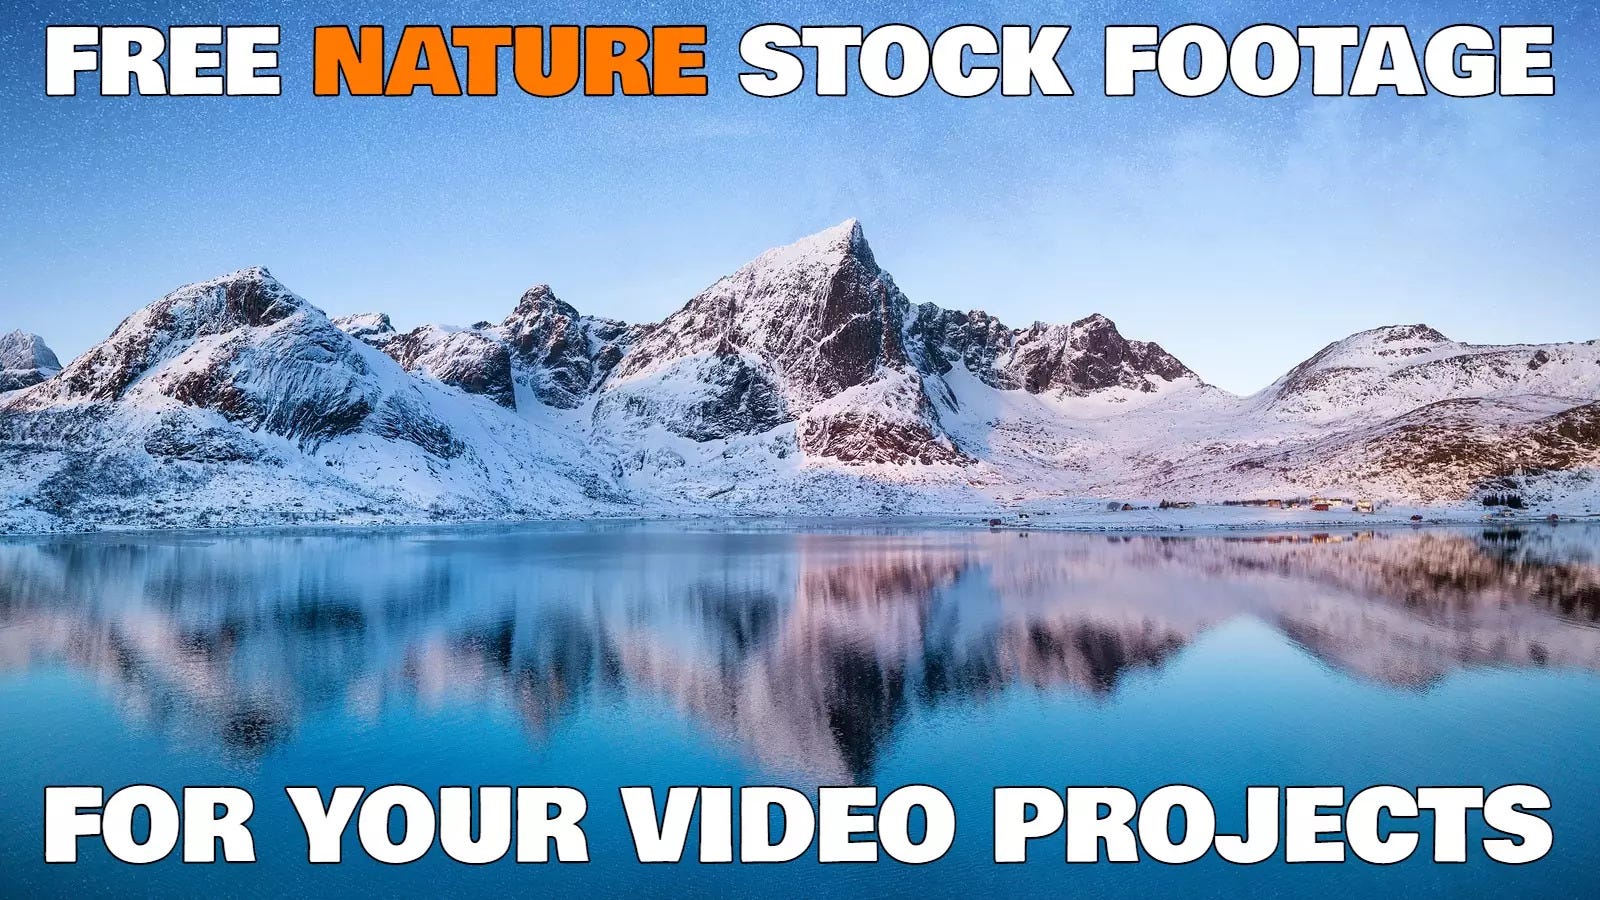 Free 4K nature stock footage. If you are looking for some nature… | by  Colton Hunter | Medium